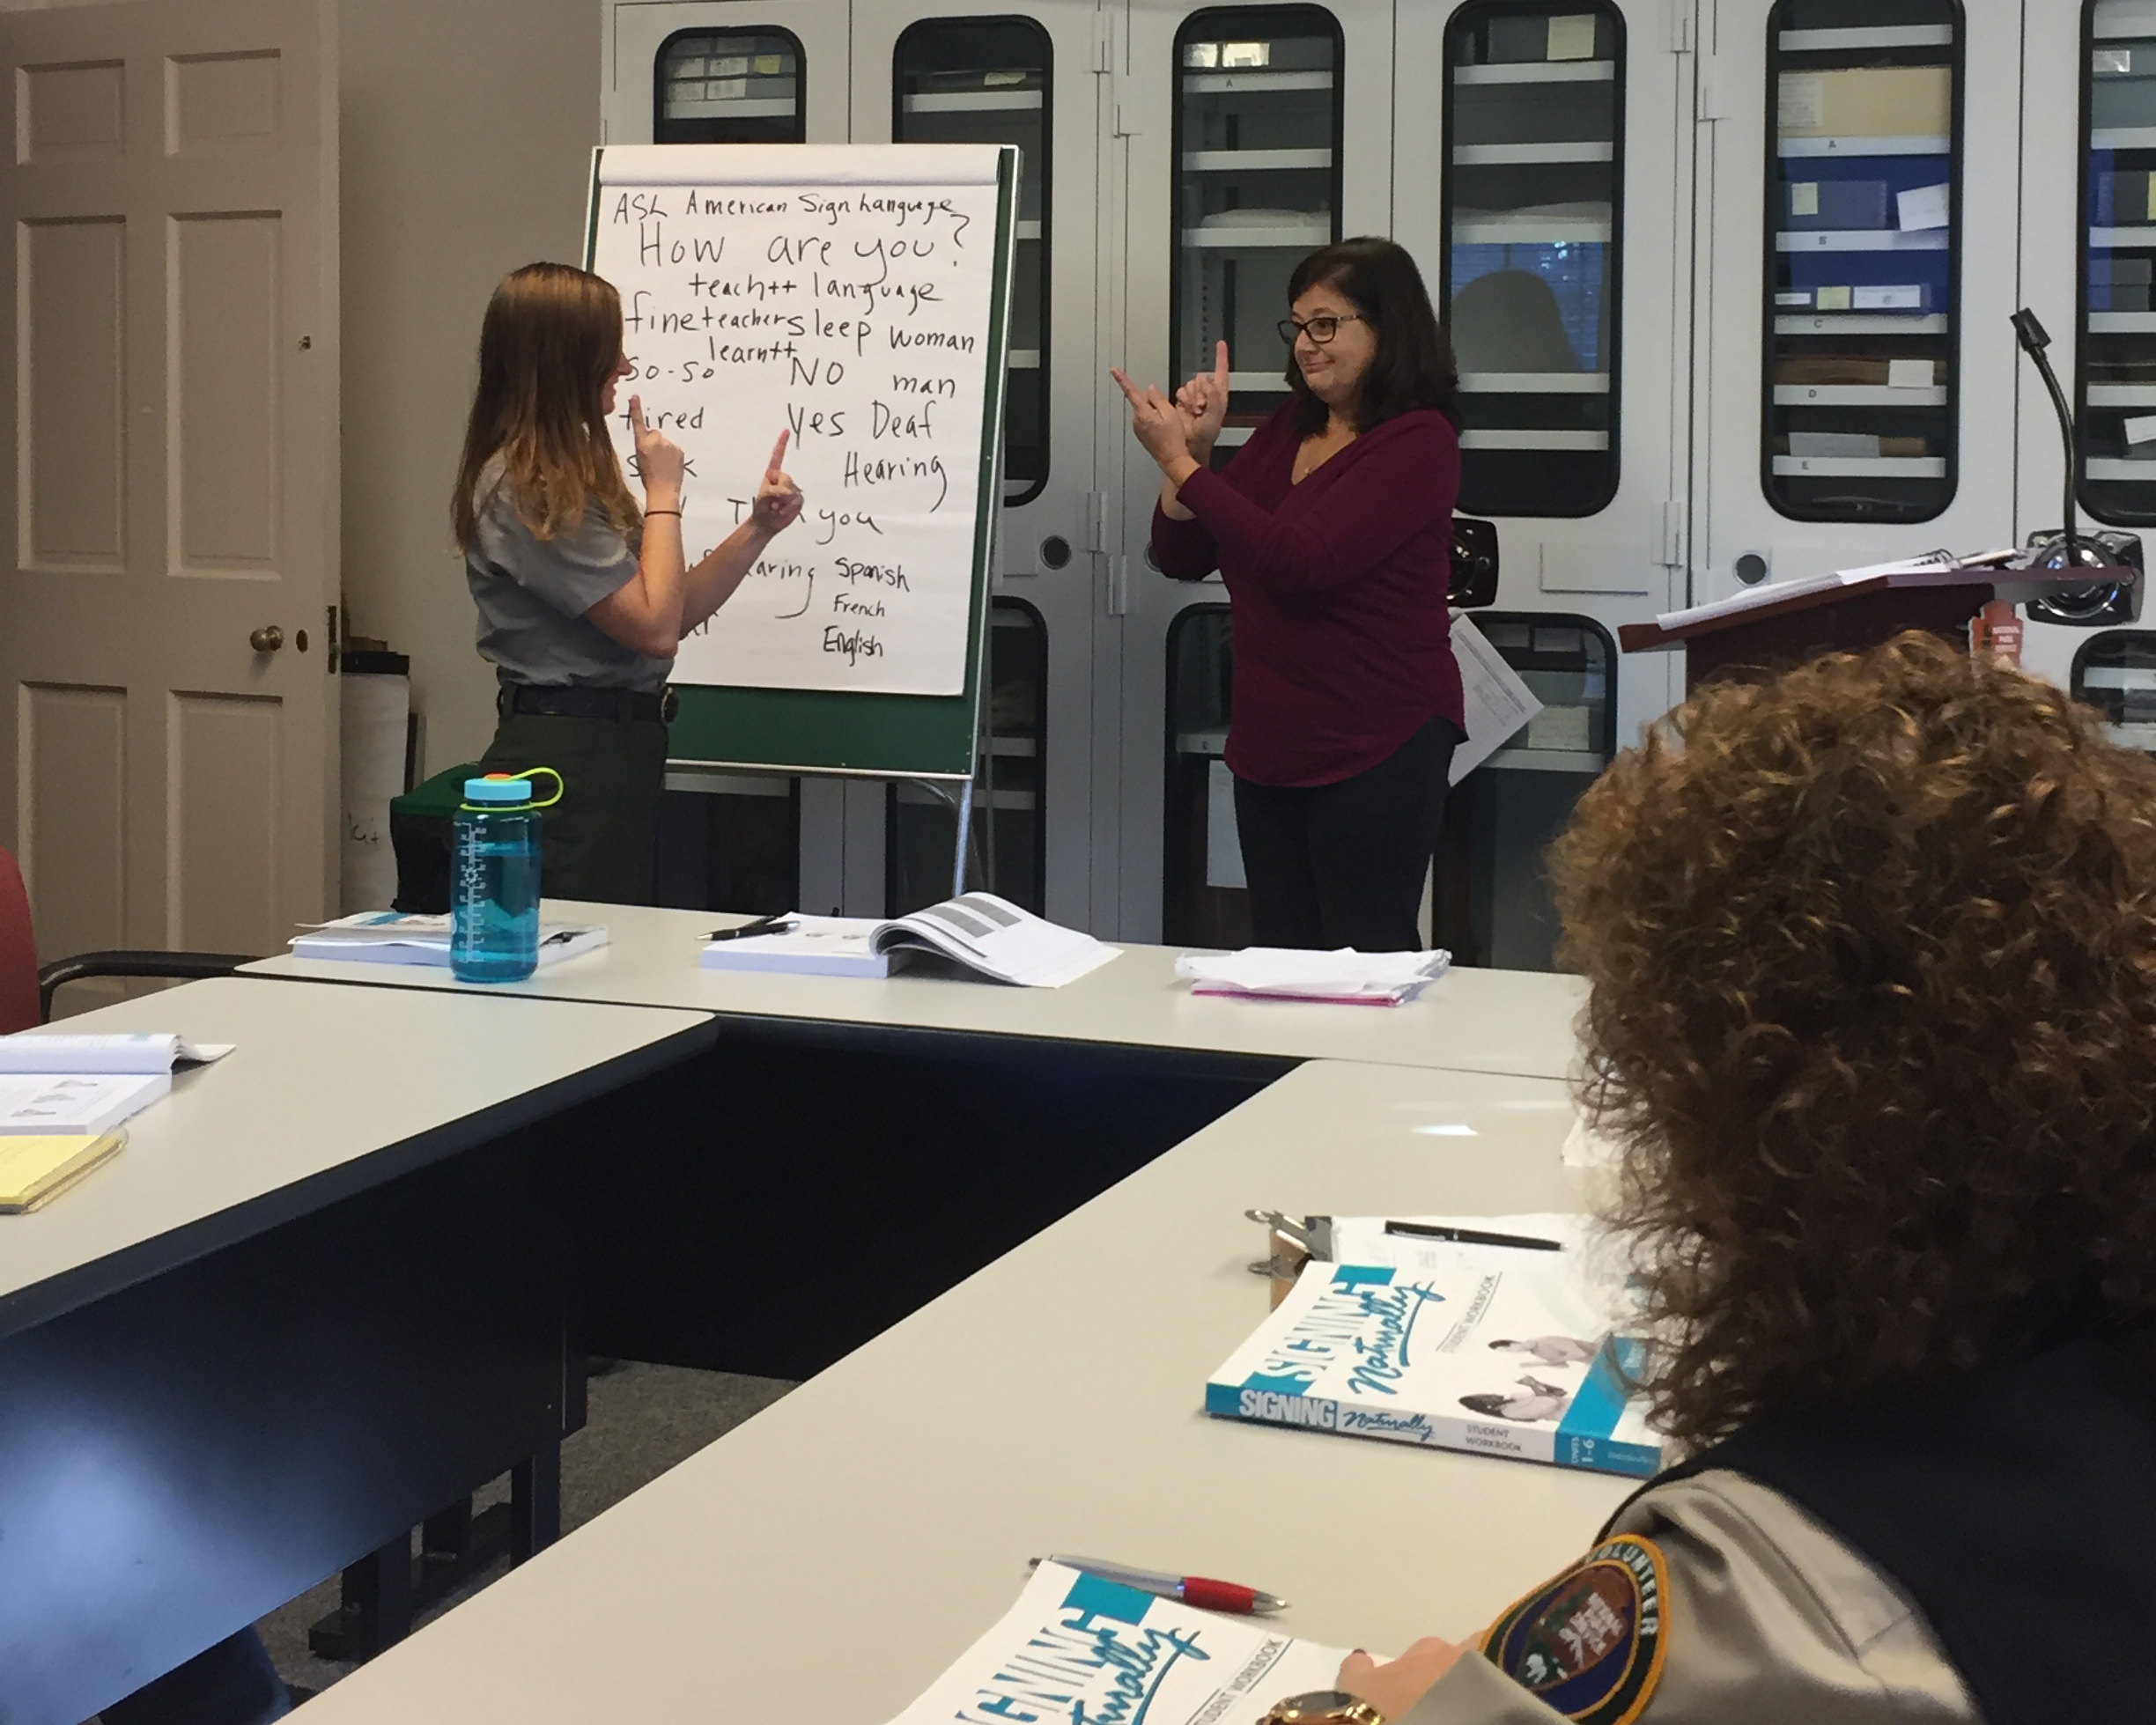 An instructor demonstrates signing for a park employee in a classroom setting.